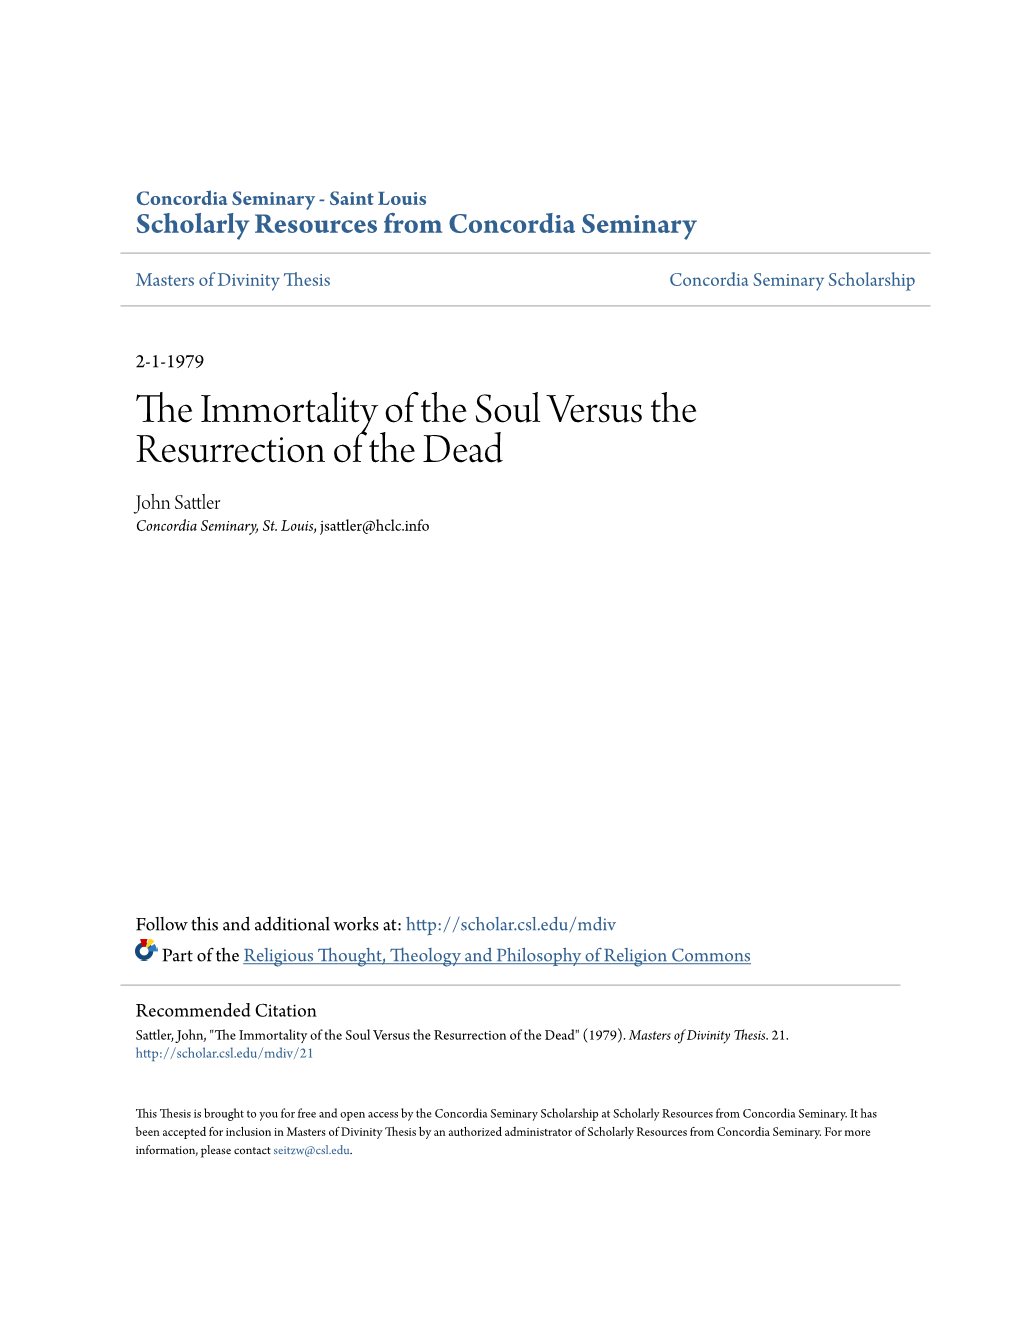 The Immortality of the Soul Versus the Resurrection of the Dead